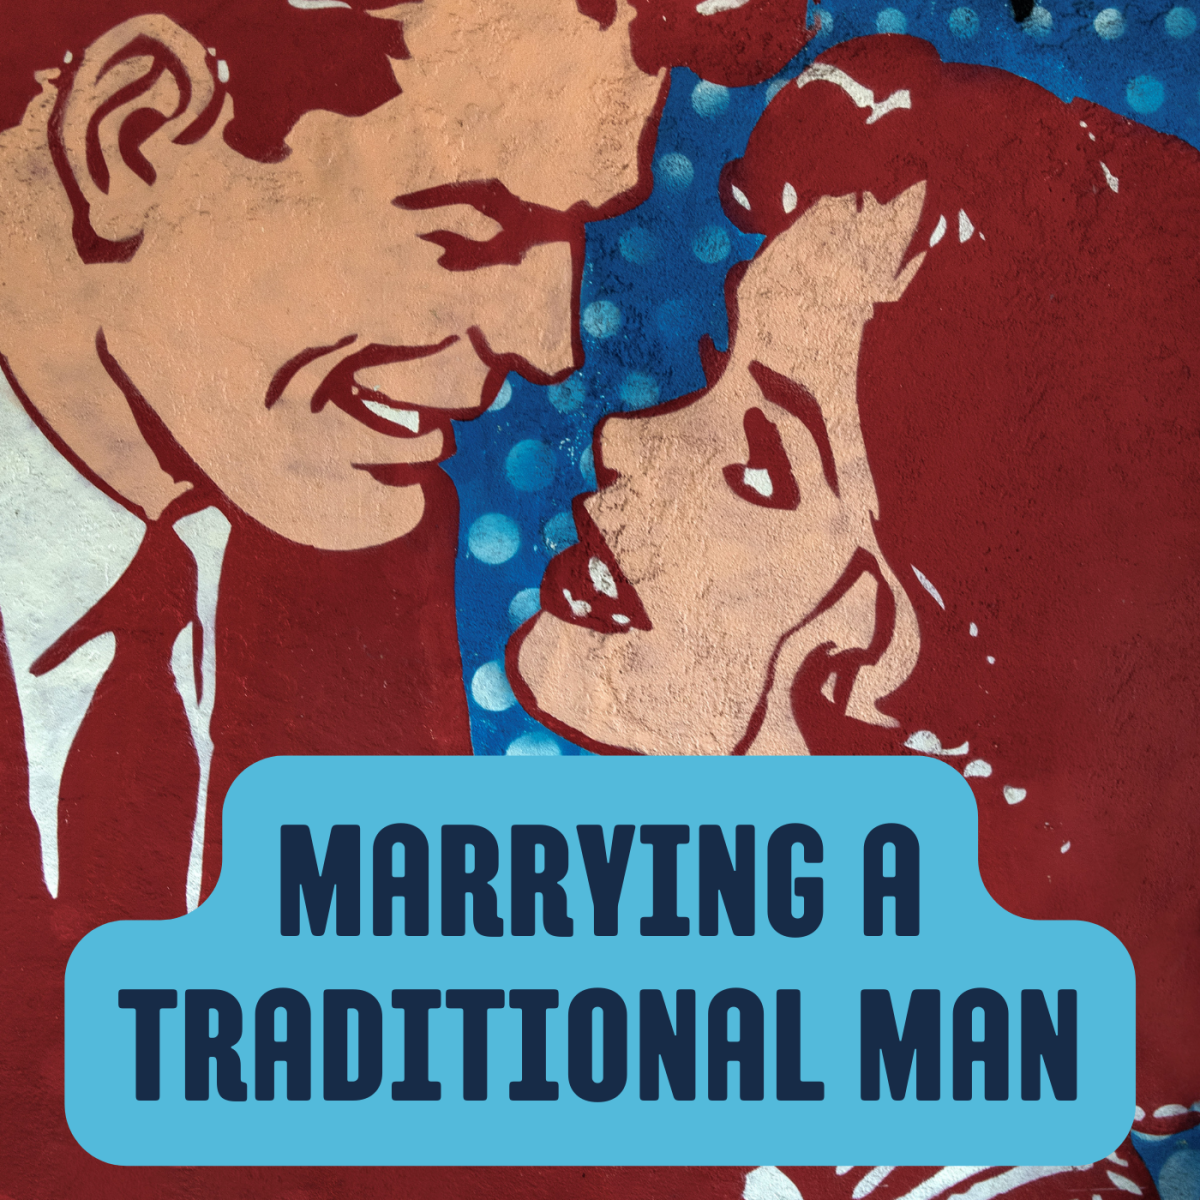 Here are seven reasons why traditional men make the best husbands.